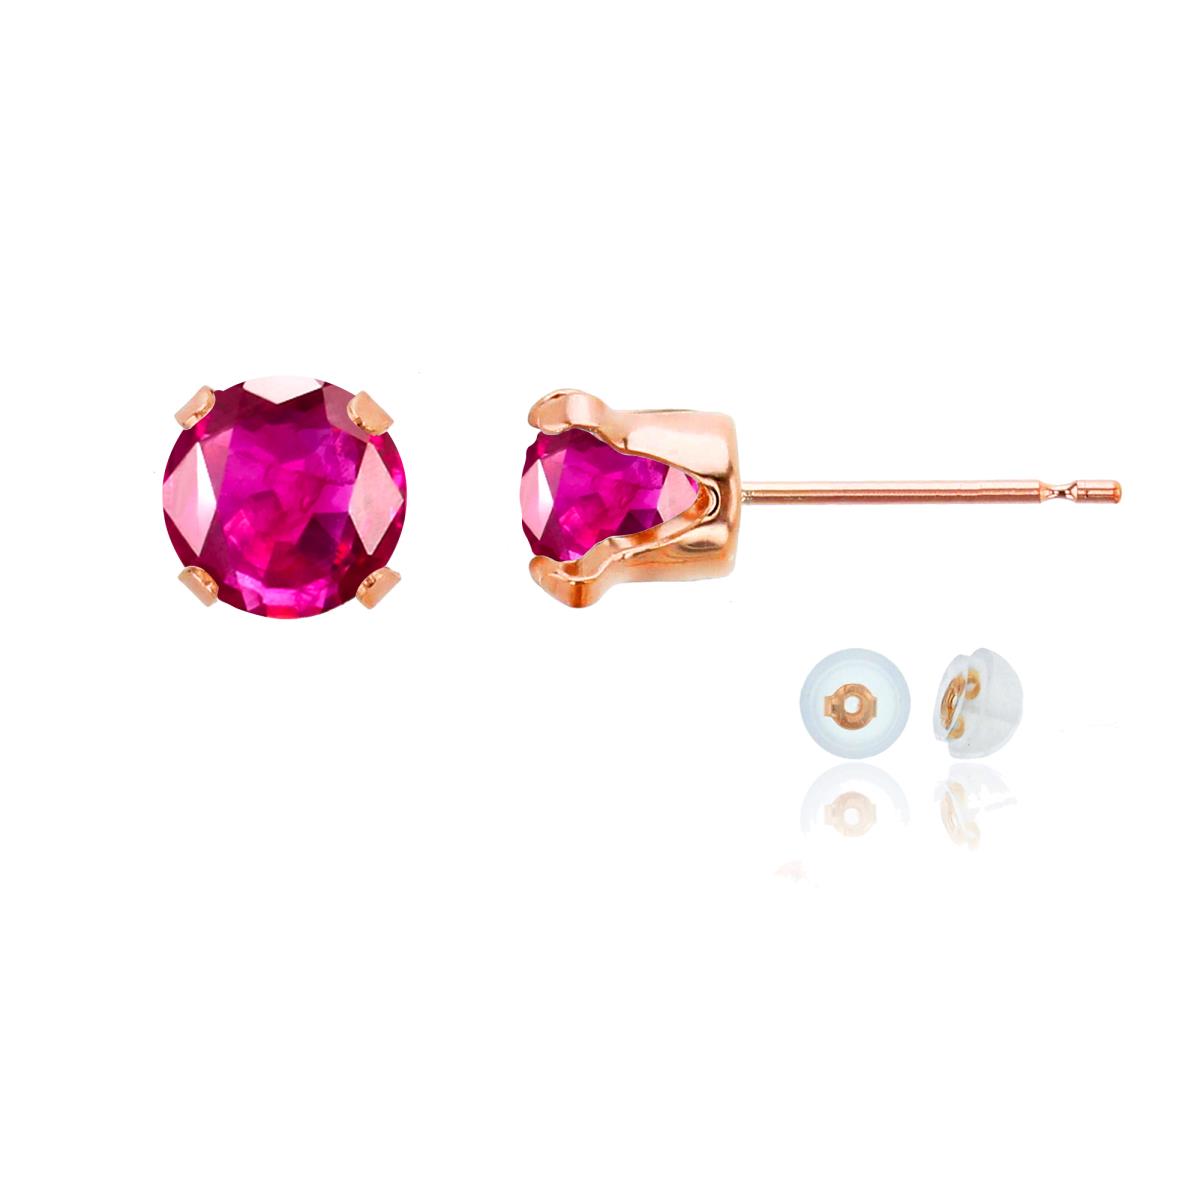 14K Rose Gold 6mm Round Glass Filled Ruby Stud Earring with Silicone Back